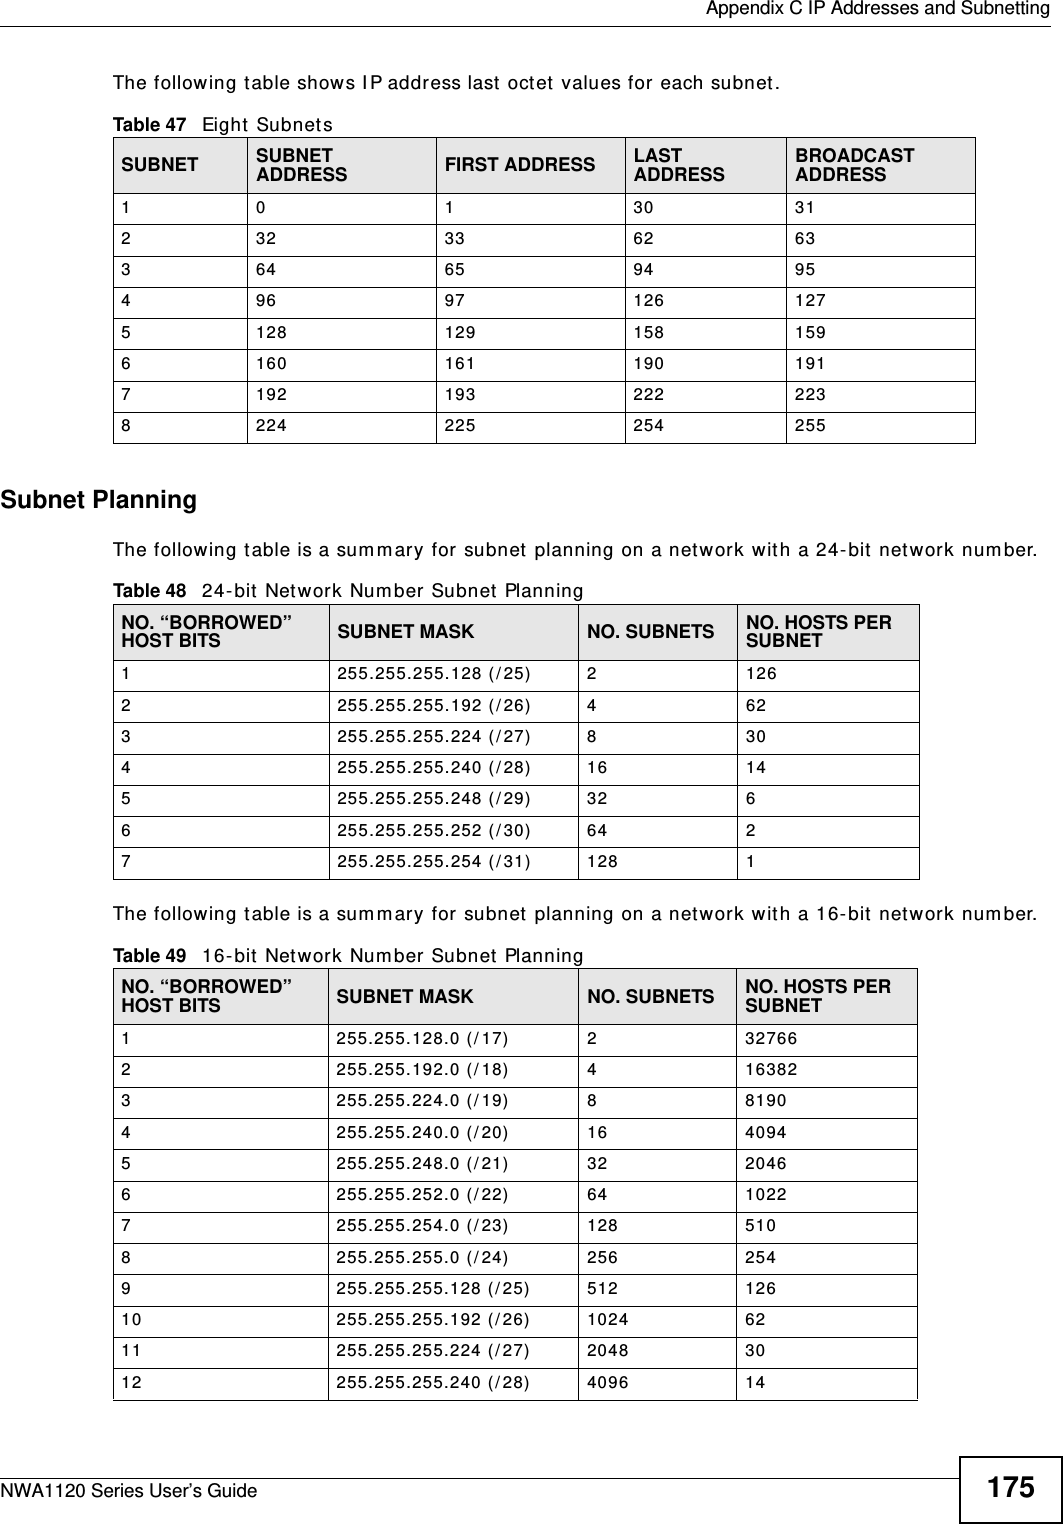  Appendix C IP Addresses and SubnettingNWA1120 Series User’s Guide 175The following table shows IP address last octet values for each subnet.Subnet PlanningThe following table is a summary for subnet planning on a network with a 24-bit network number.The following table is a summary for subnet planning on a network with a 16-bit network number. Table 47   Eight SubnetsSUBNET SUBNET ADDRESS FIRST ADDRESS LAST ADDRESS BROADCAST ADDRESS1 0 1 30 31232 33 62 63364 65 94 95496 97 126 1275128 129 158 1596160 161 190 1917192 193 222 2238224 225 254 255Table 48   24-bit Network Number Subnet PlanningNO. “BORROWED” HOST BITS SUBNET MASK NO. SUBNETS NO. HOSTS PER SUBNET1255.255.255.128 (/25) 21262255.255.255.192 (/26) 4623255.255.255.224 (/27) 8304255.255.255.240 (/28) 16 145255.255.255.248 (/29) 32 66255.255.255.252 (/30) 64 27255.255.255.254 (/31) 128 1Table 49   16-bit Network Number Subnet PlanningNO. “BORROWED” HOST BITS SUBNET MASK NO. SUBNETS NO. HOSTS PER SUBNET1255.255.128.0 (/17) 2327662255.255.192.0 (/18) 4163823255.255.224.0 (/19) 881904255.255.240.0 (/20) 16 40945255.255.248.0 (/21) 32 20466255.255.252.0 (/22) 64 10227255.255.254.0 (/23) 128 5108255.255.255.0 (/24) 256 2549255.255.255.128 (/25) 512 12610 255.255.255.192 (/26) 1024 6211 255.255.255.224 (/27) 2048 3012 255.255.255.240 (/28) 4096 14